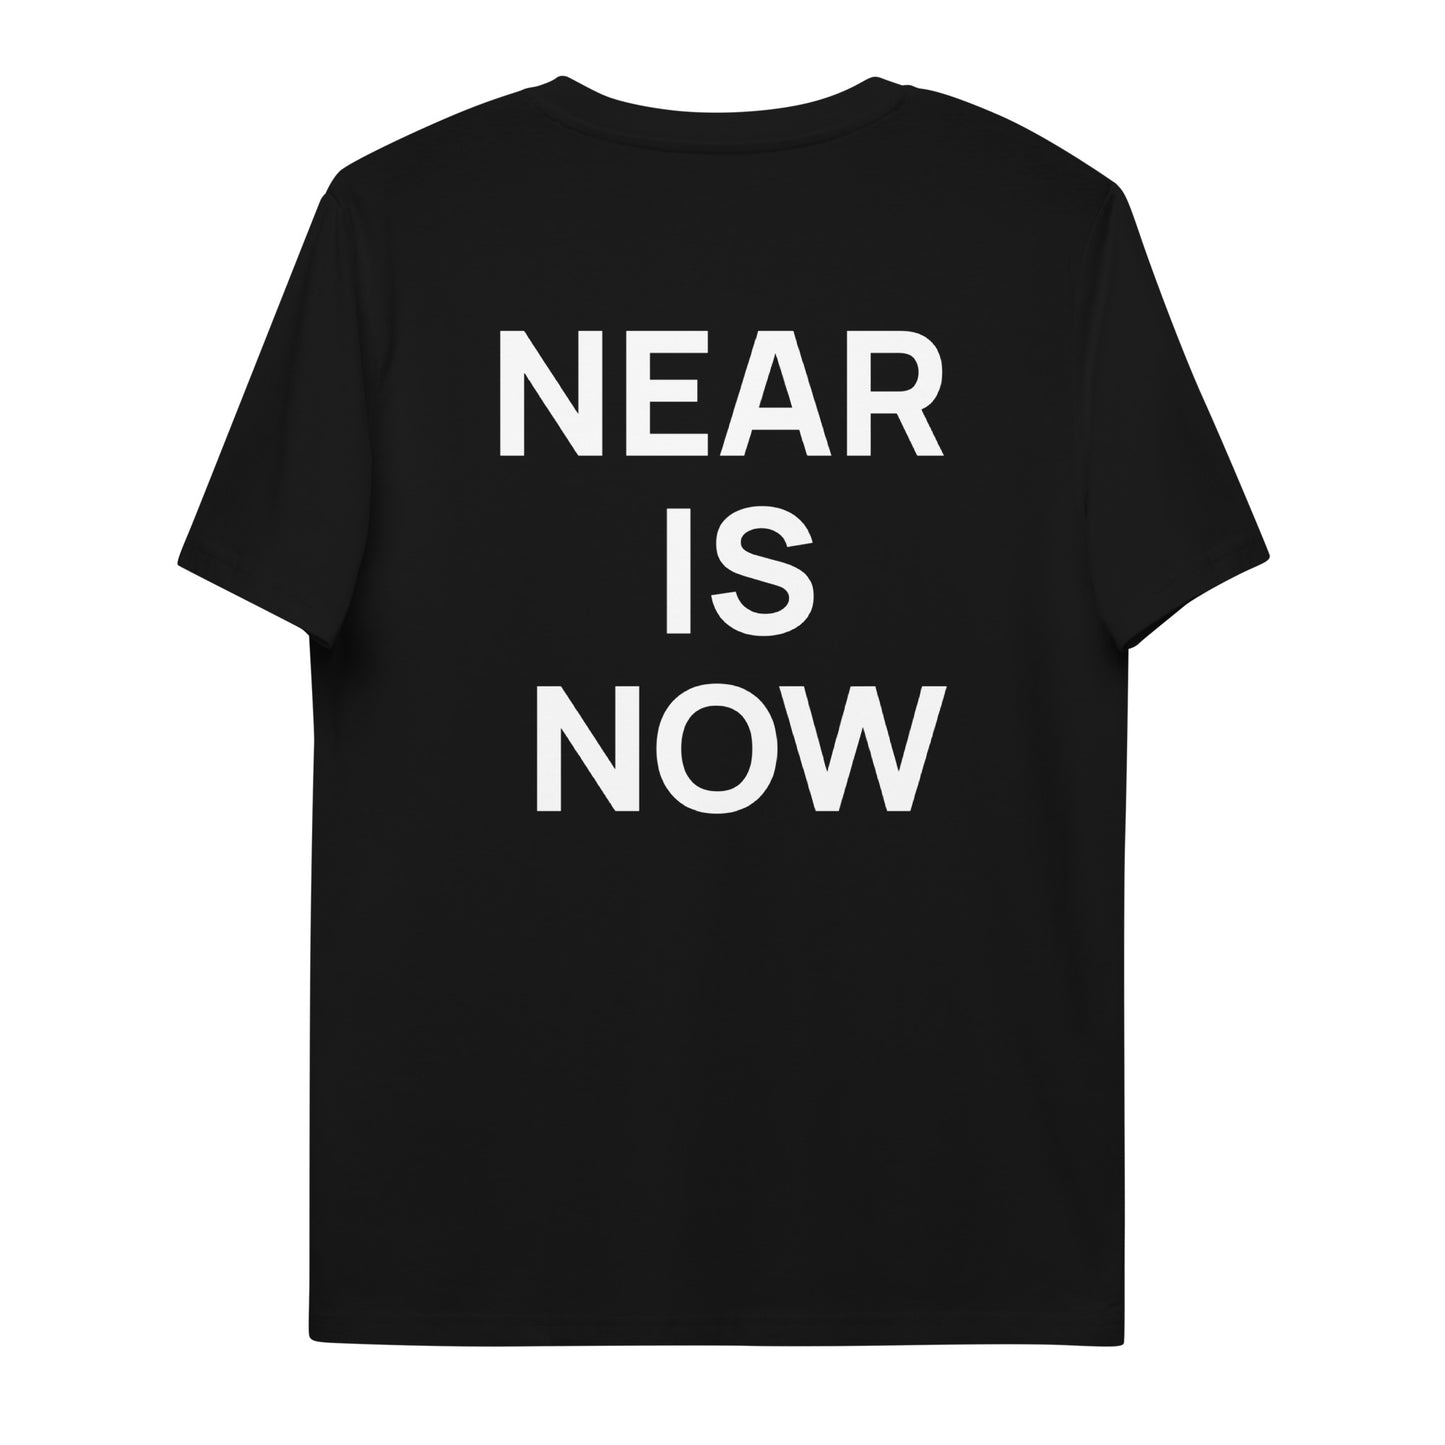 NEAR IS NOW T-shirt